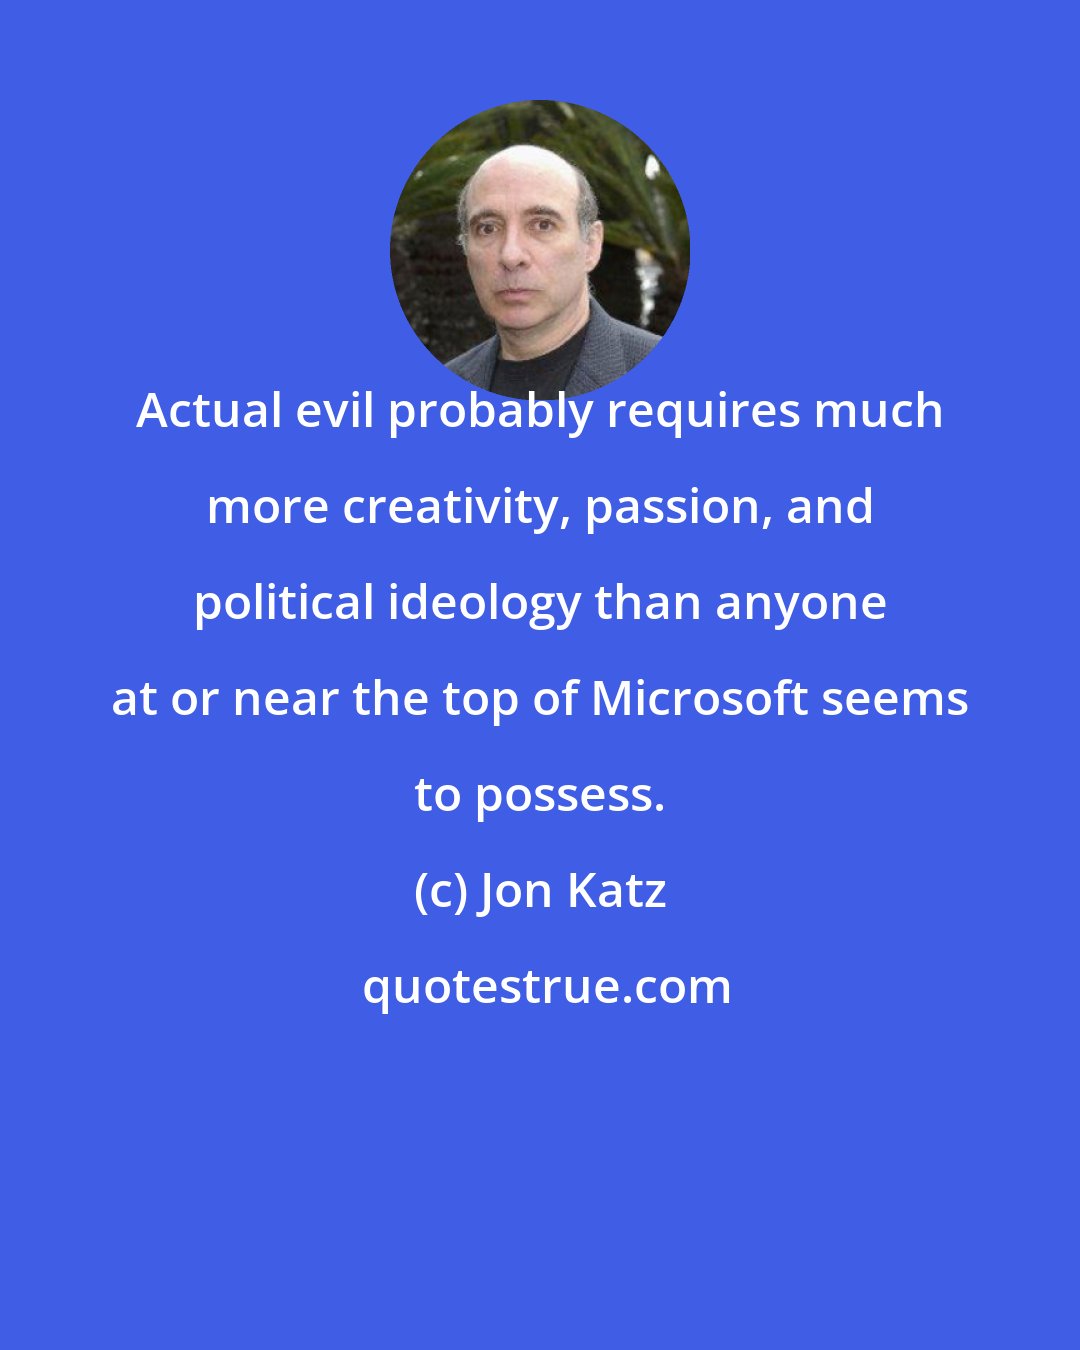 Jon Katz: Actual evil probably requires much more creativity, passion, and political ideology than anyone at or near the top of Microsoft seems to possess.